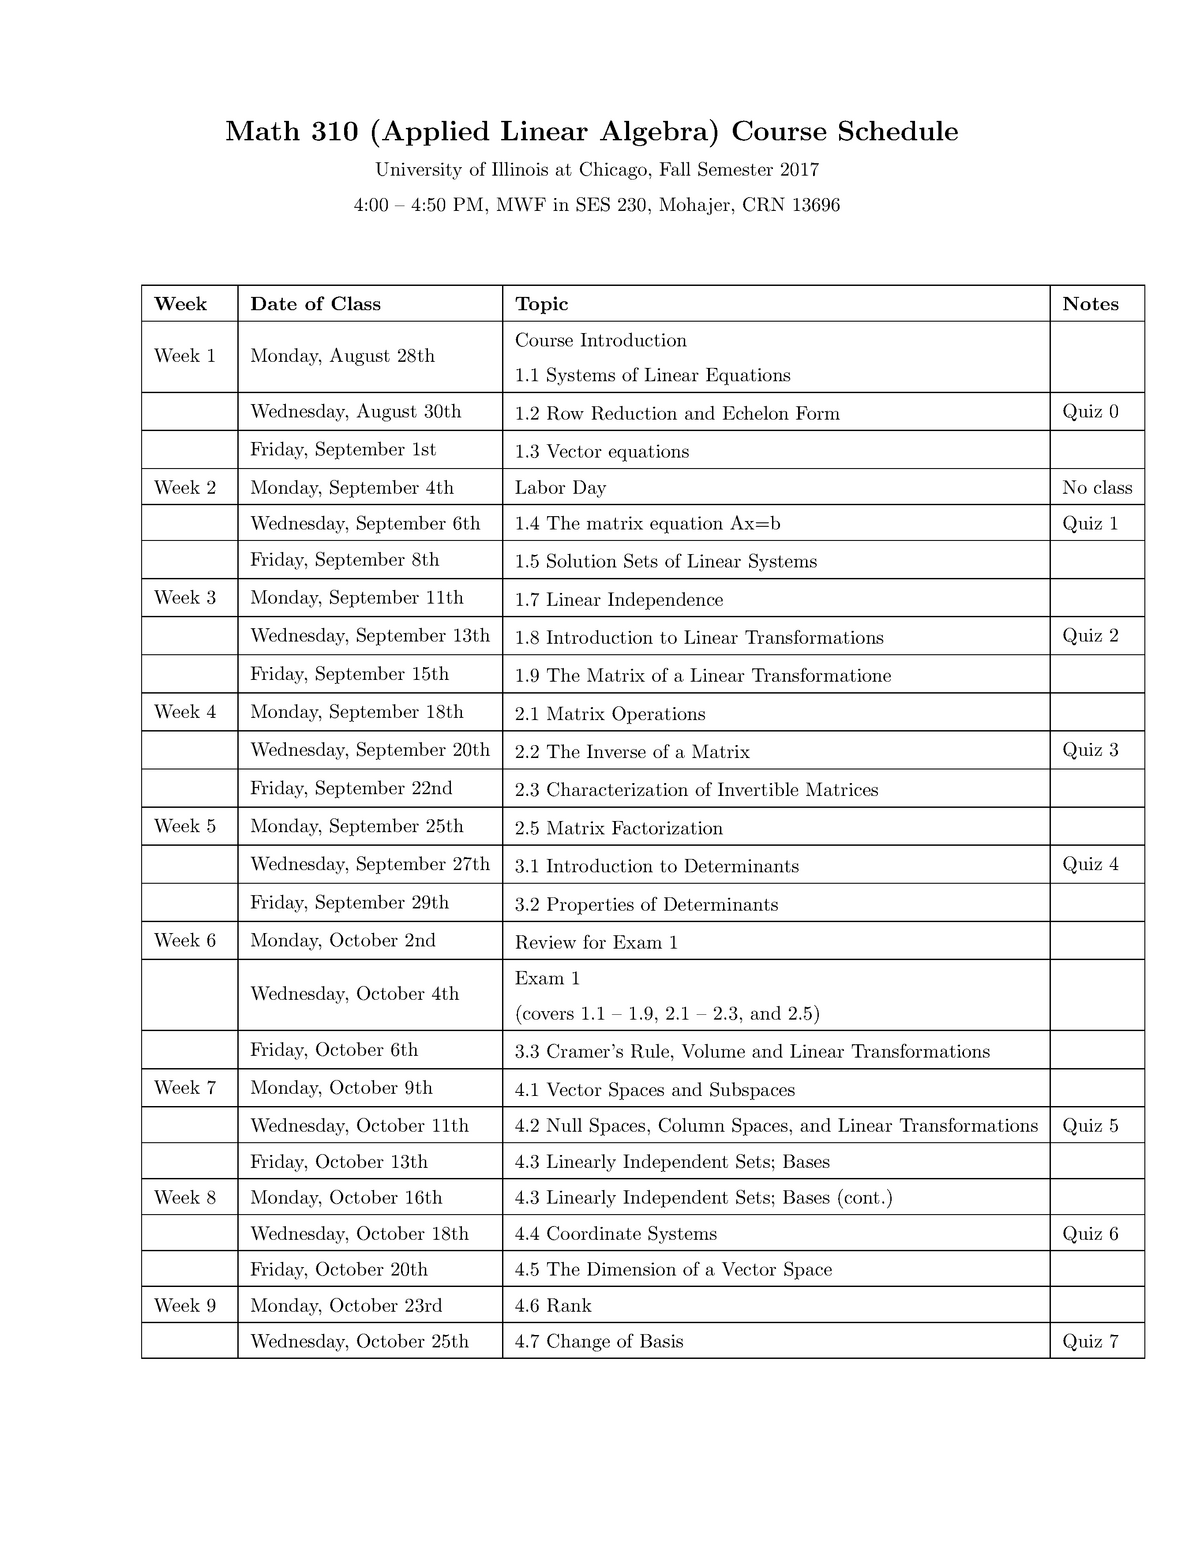 Math 310 fall 2017 uic course schedule Math 310 (Applied Linear